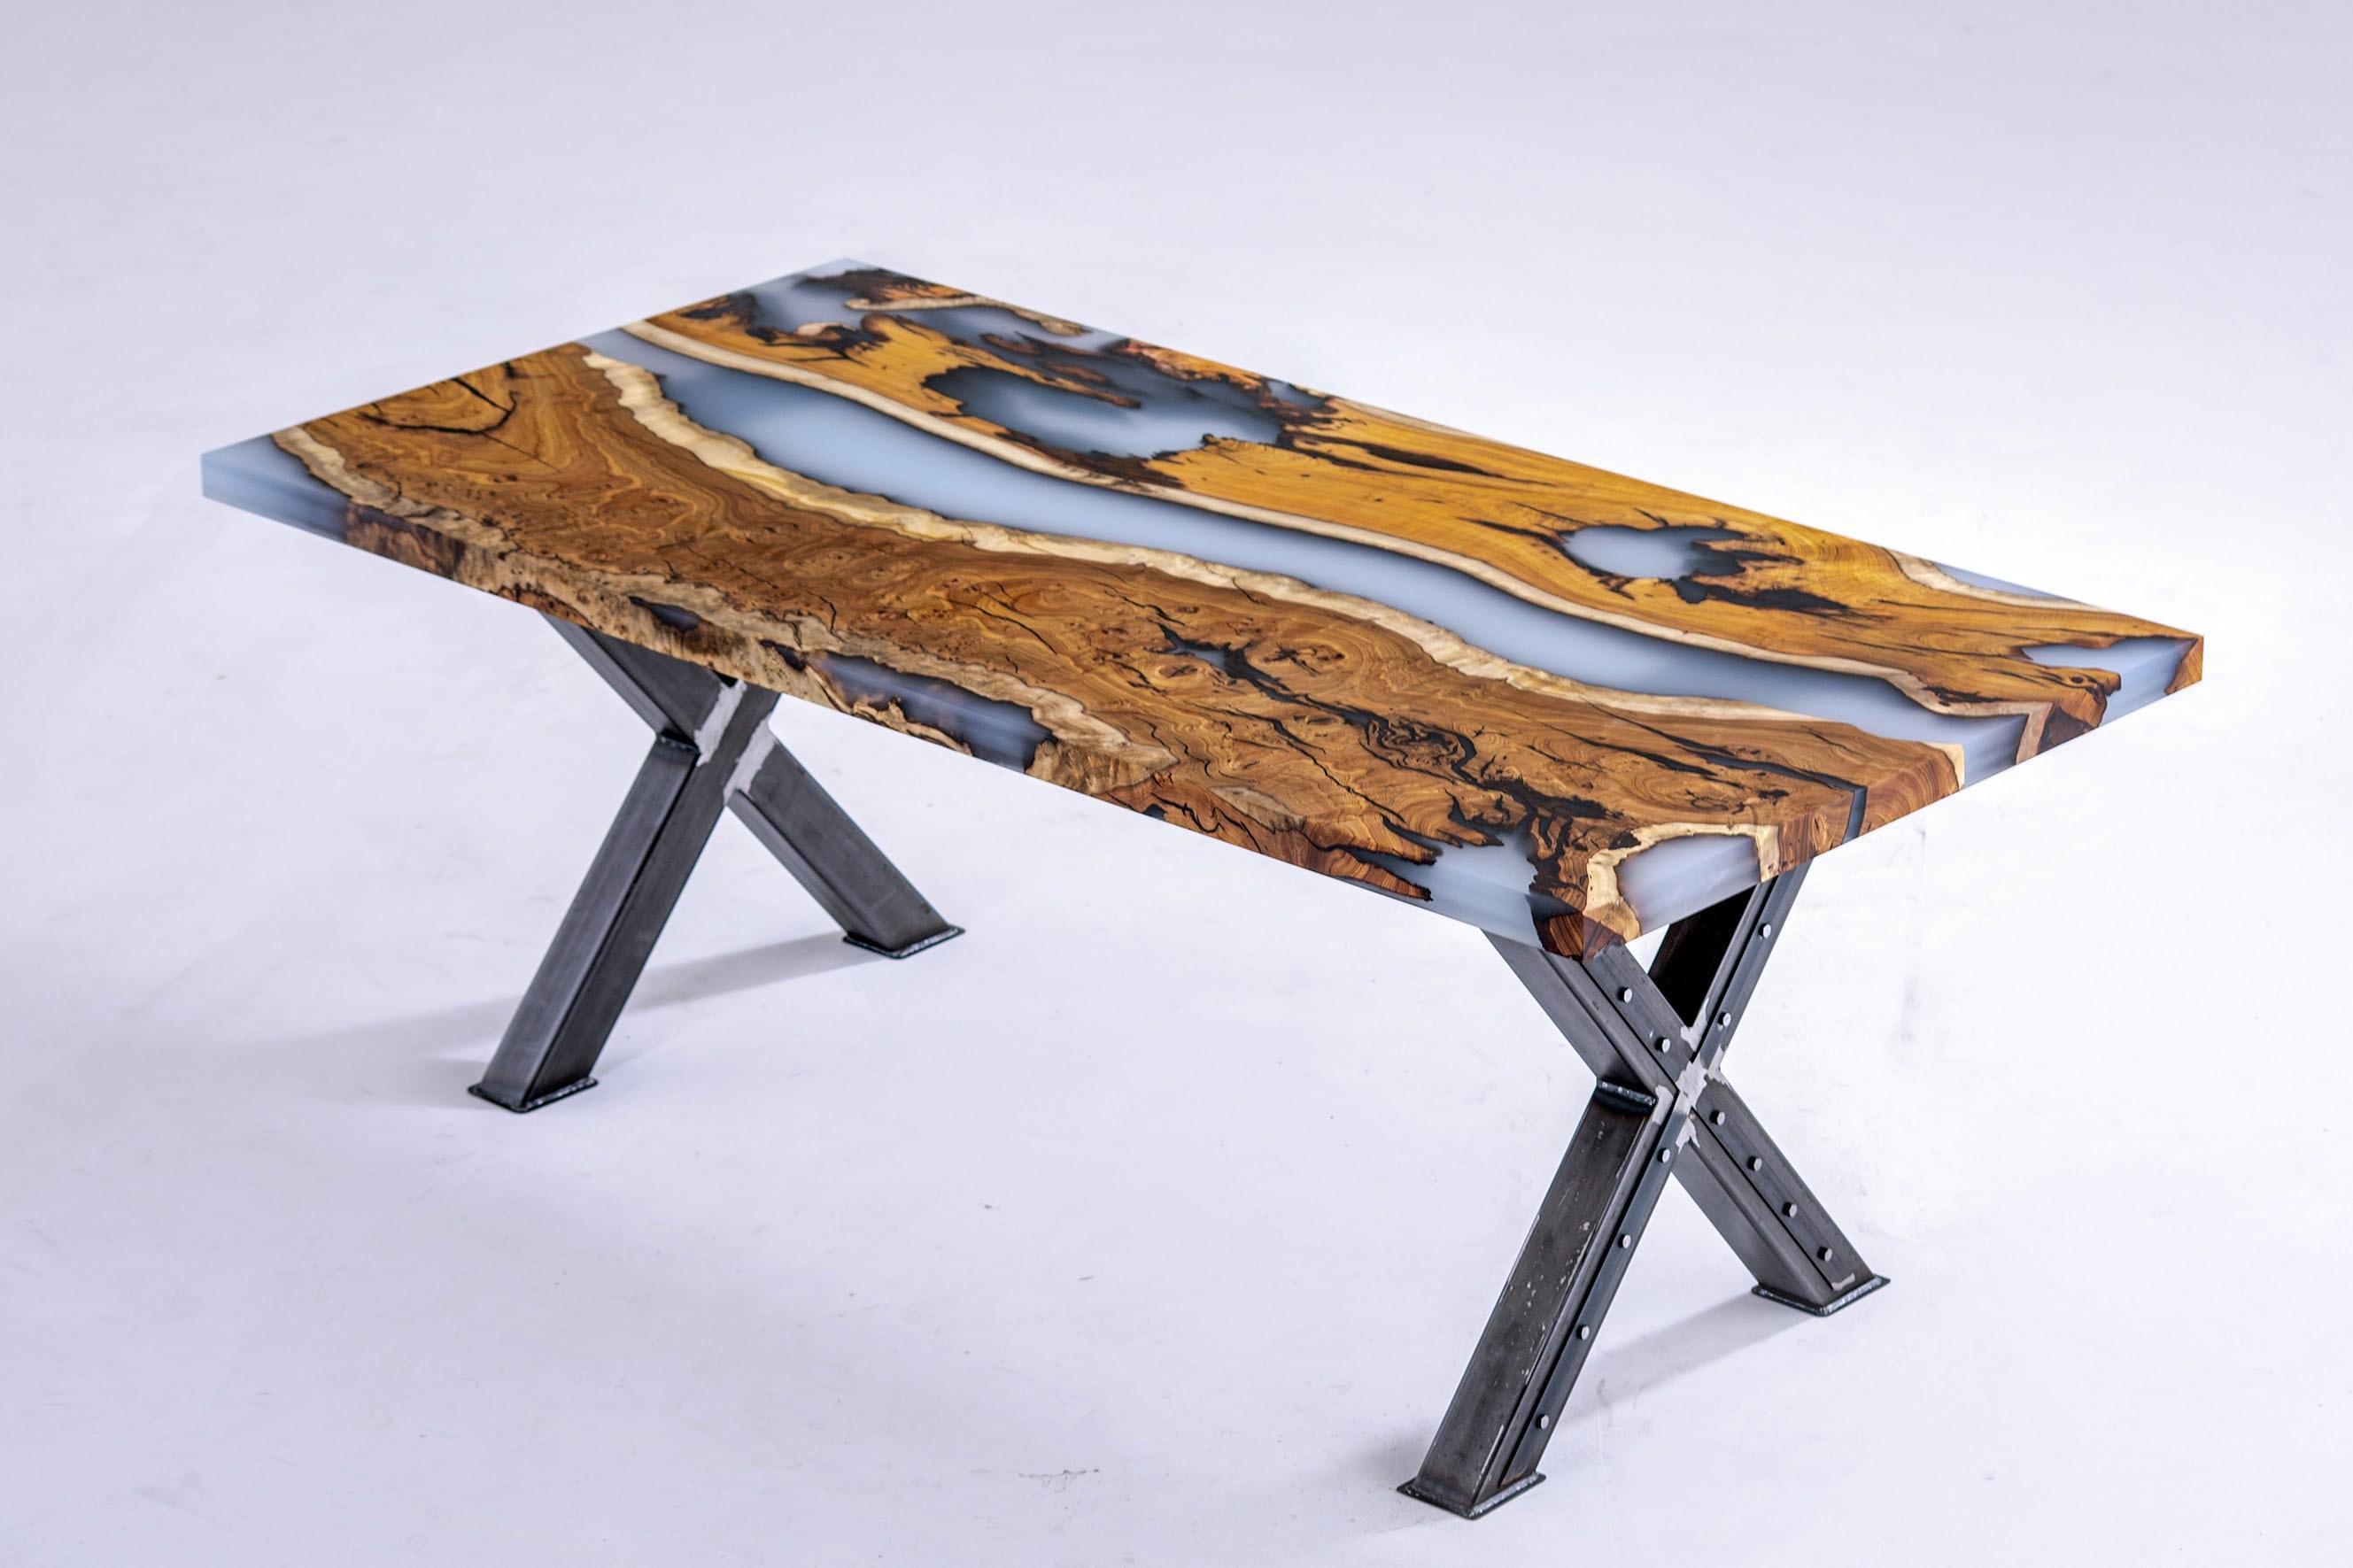 HACKBERRY SMOKE EPOXY RESIN DINING TABLE

This epoxy table emerges as a unique work of art, inspired by nature's beauty. 

The epoxy table stands out not only for its design but also its durability. Thanks to its epoxy coating, it is highly